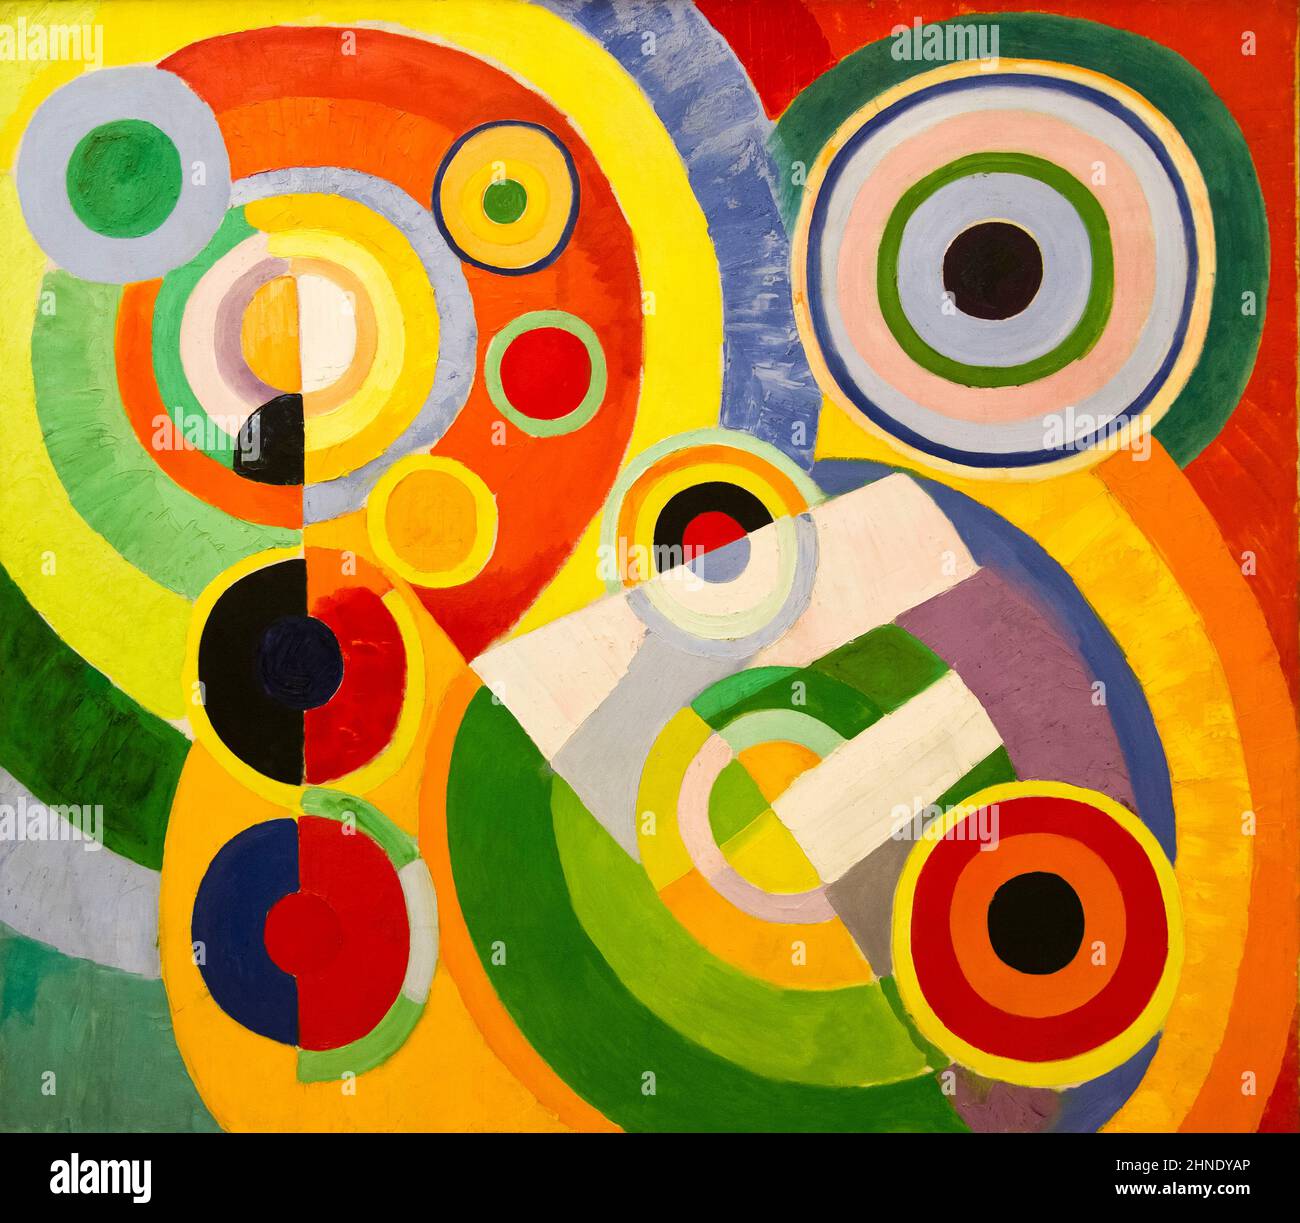 Robert Delaunay, Rythme, Joie de vivre, abstract painting, oil on canvas, 1930 Stock Photo